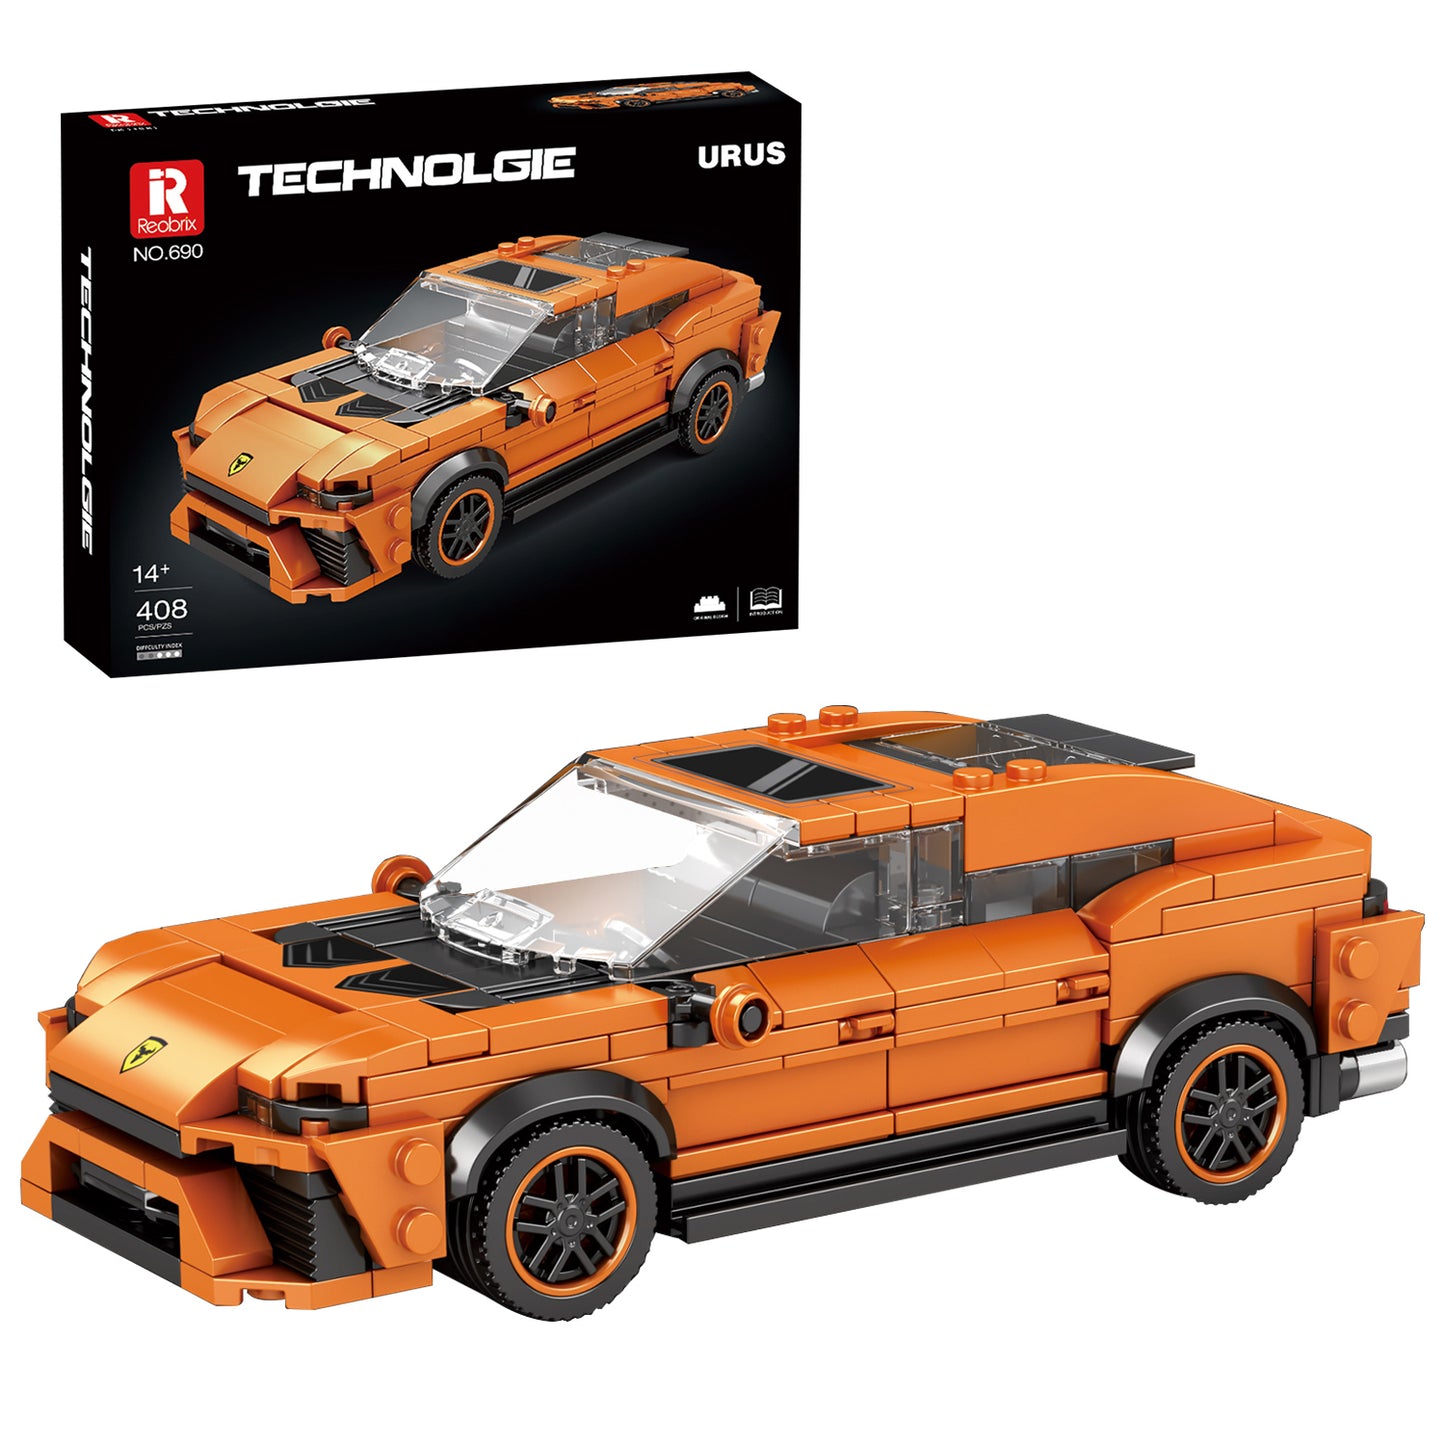 Load image into Gallery viewer, Reobrix 690 car 408pcs 1:24 17 × 8 × 5.5 cm Original Packaging
